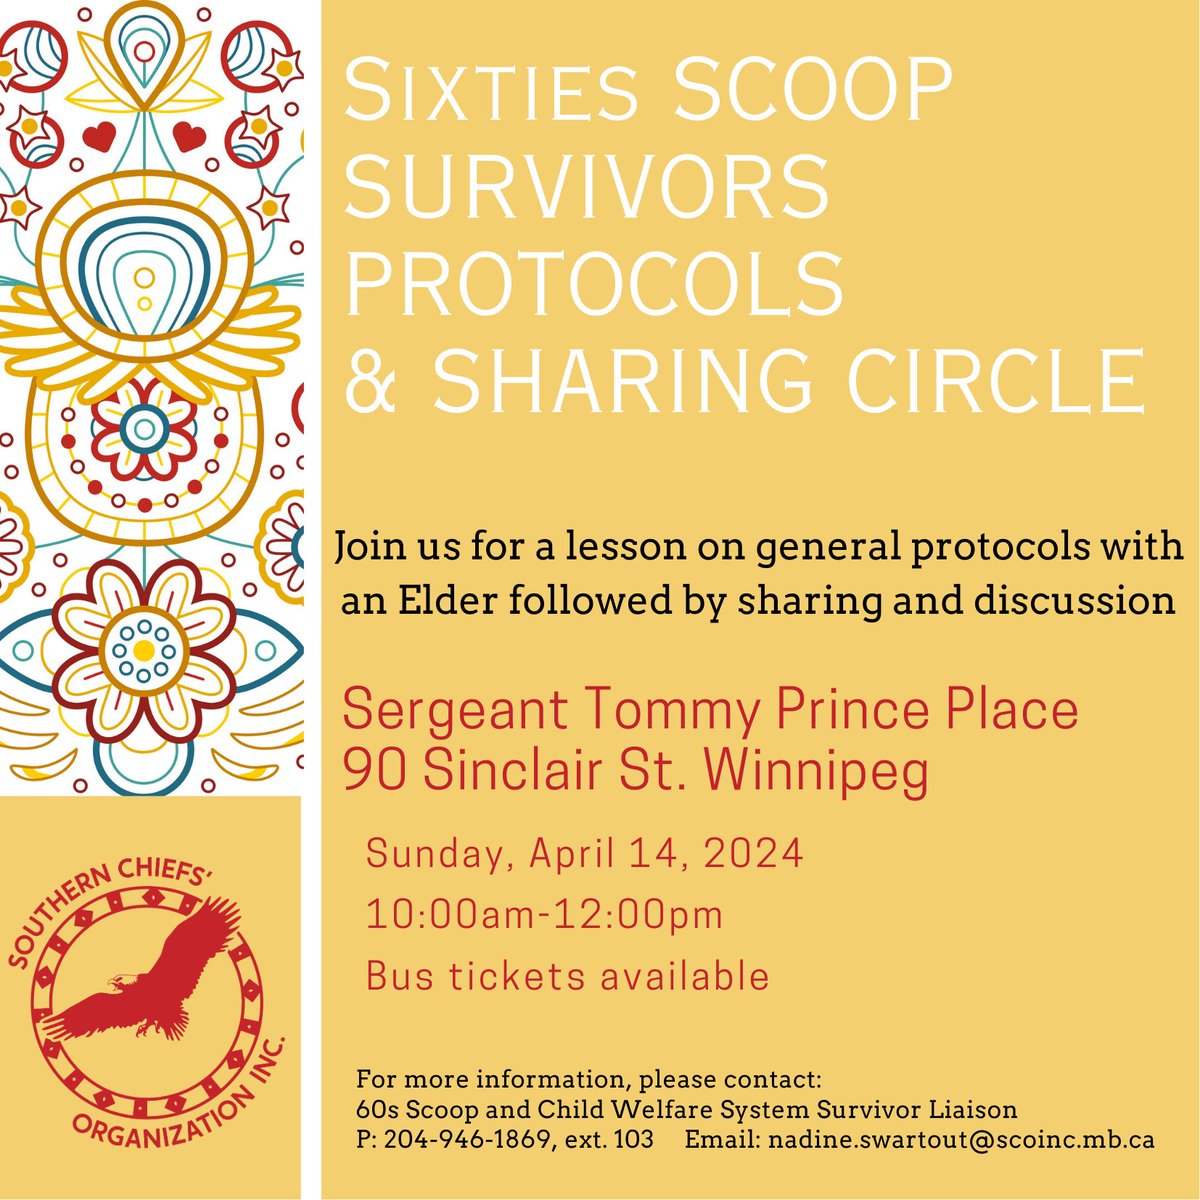 SCO invites Survivors of the Sixties Scoop to learn protocols from a male and female Elder on Sunday, April 14, from 10 am to 12 pm. This time together will serve as a safe space to be with fellow Survivors and to learn and discuss basic protocols. #SCOINCMB #SixtiesScoop